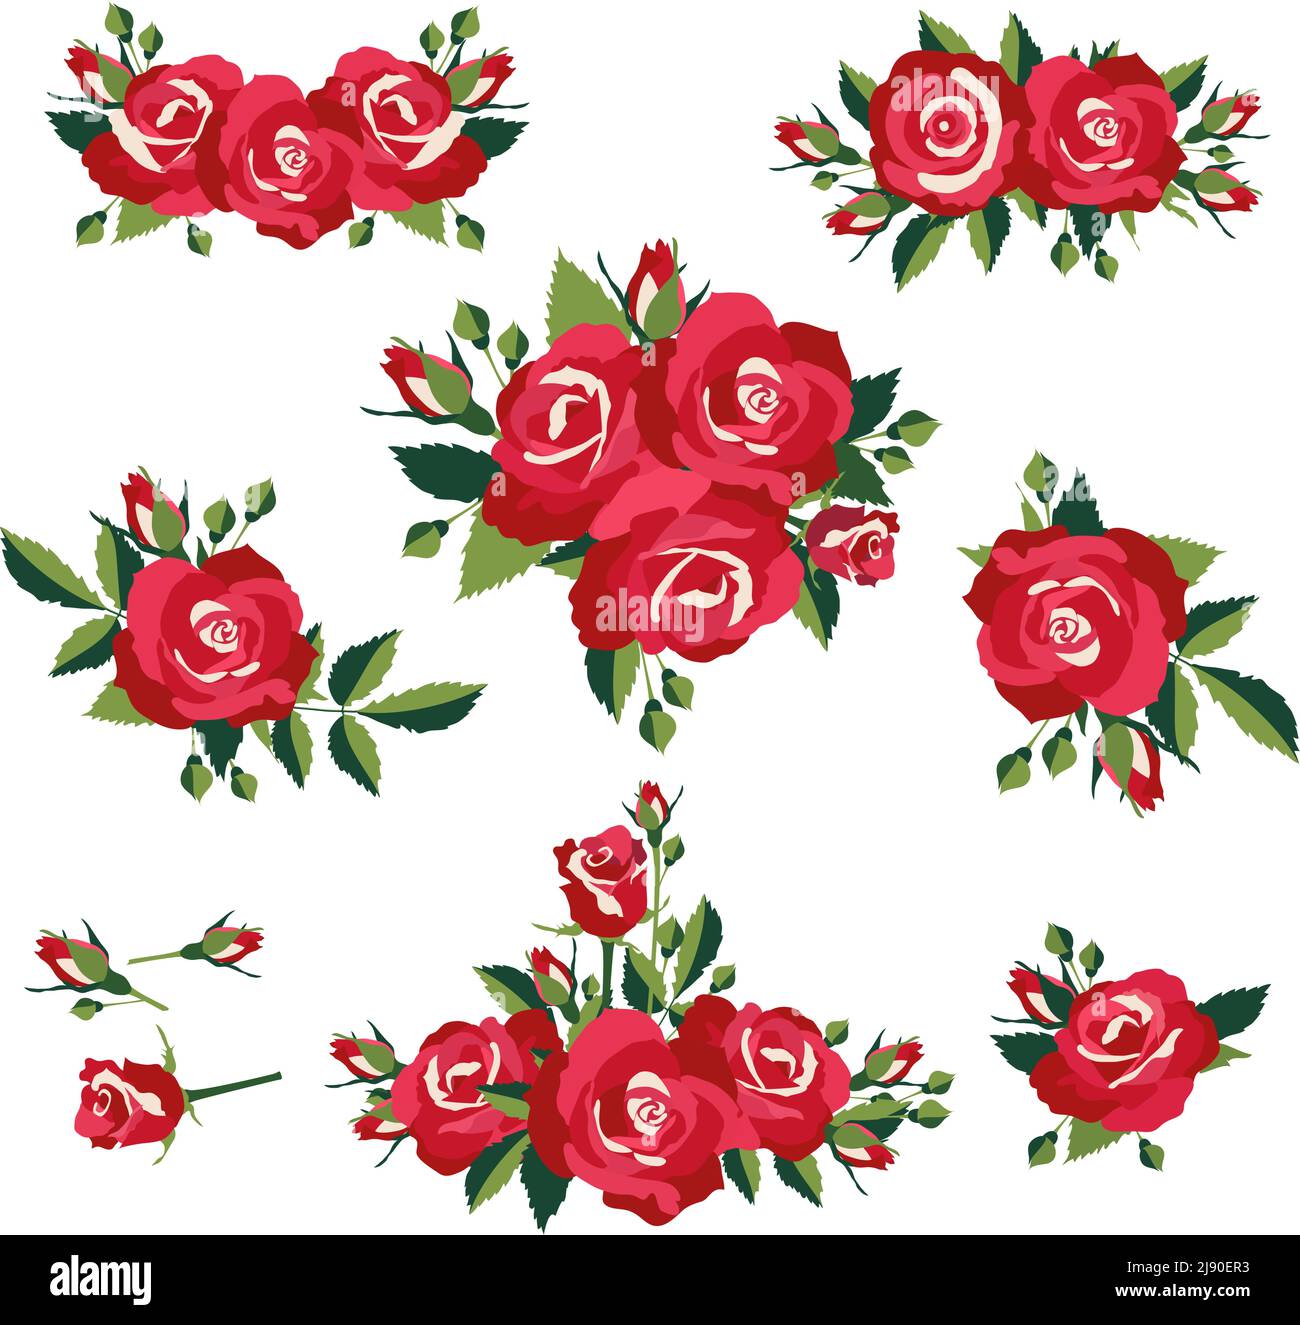 inflorescence or bouquets of roses on white background vector illustration Stock Vector